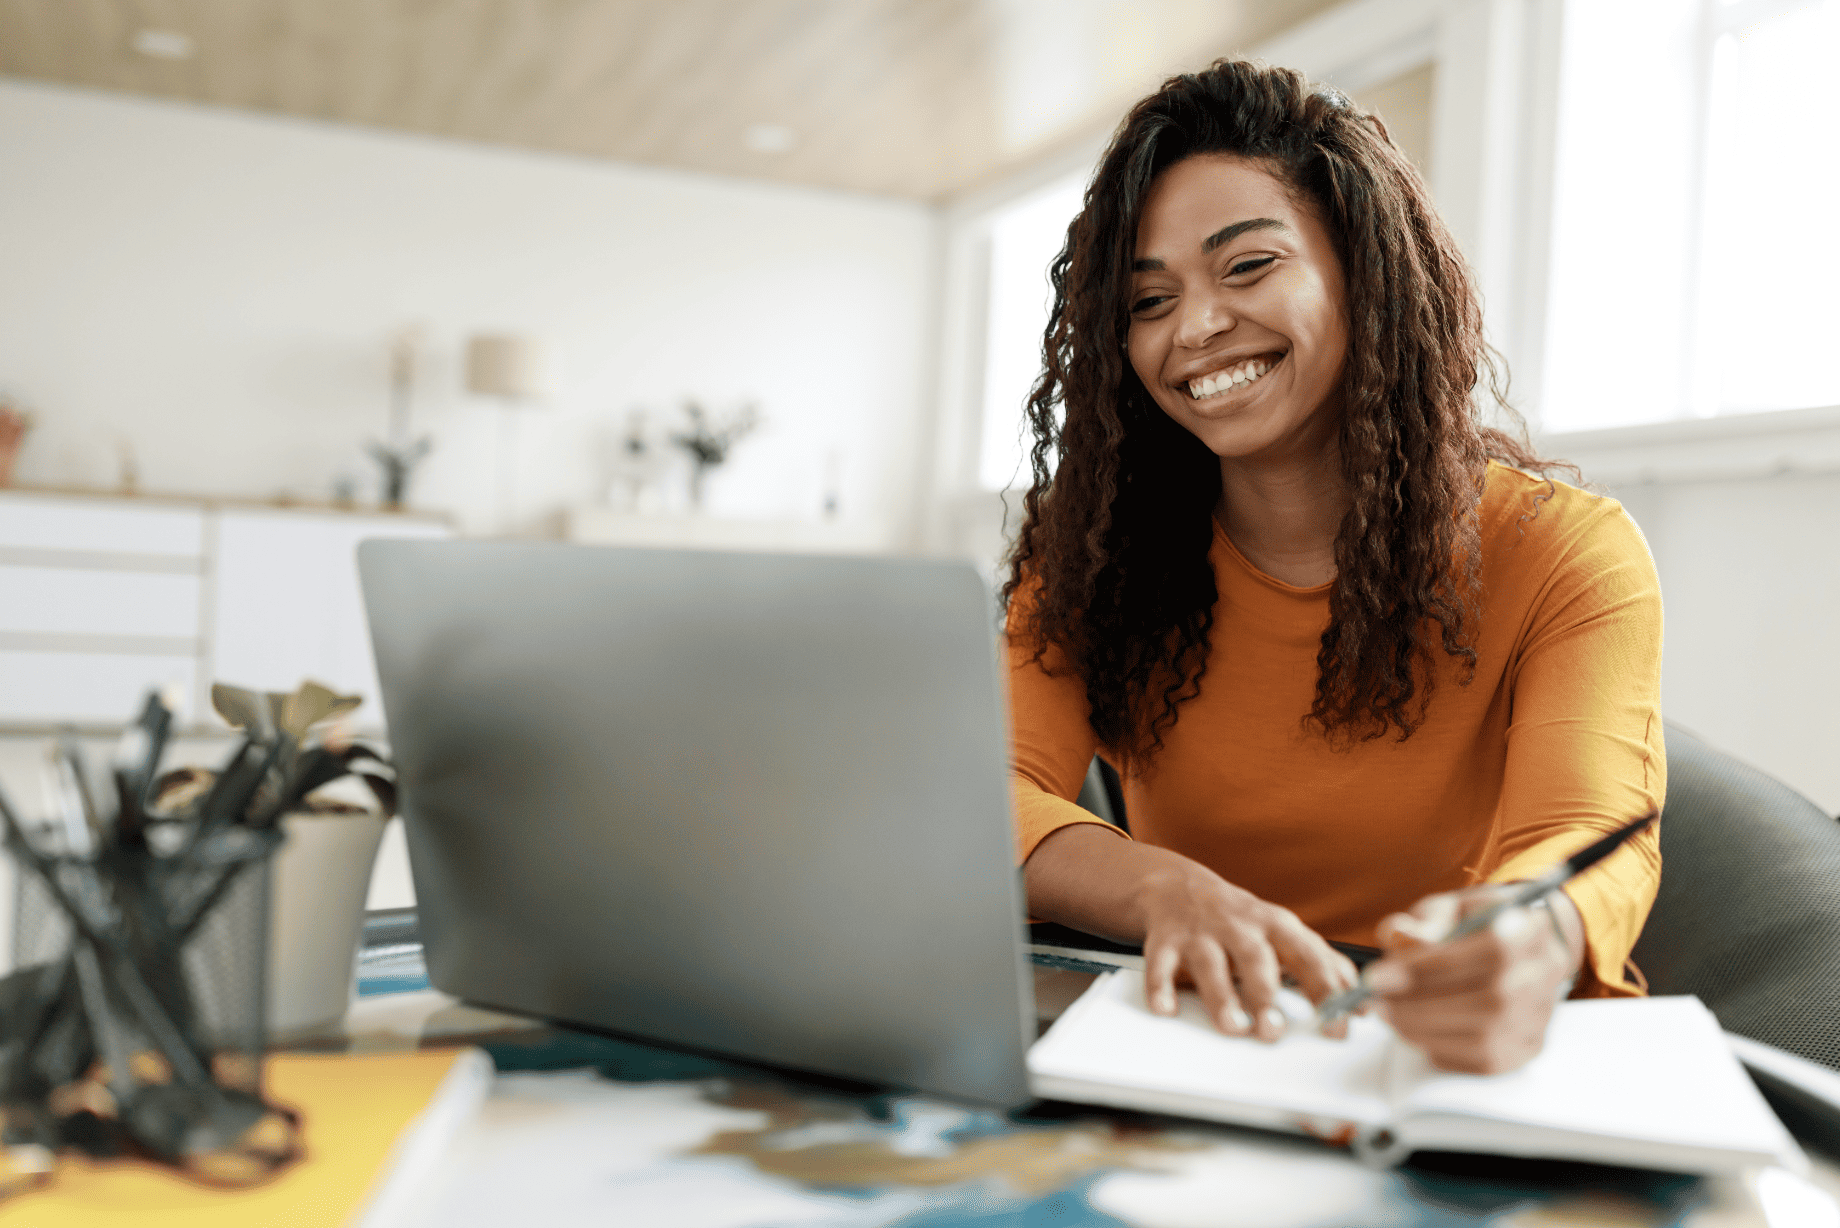 Distance Education. Portrait of smiling woman sitting at desk, using laptop and writing in notebook, taking notes, watching tutorial, lecture or webinar, studying online at home looking at screen